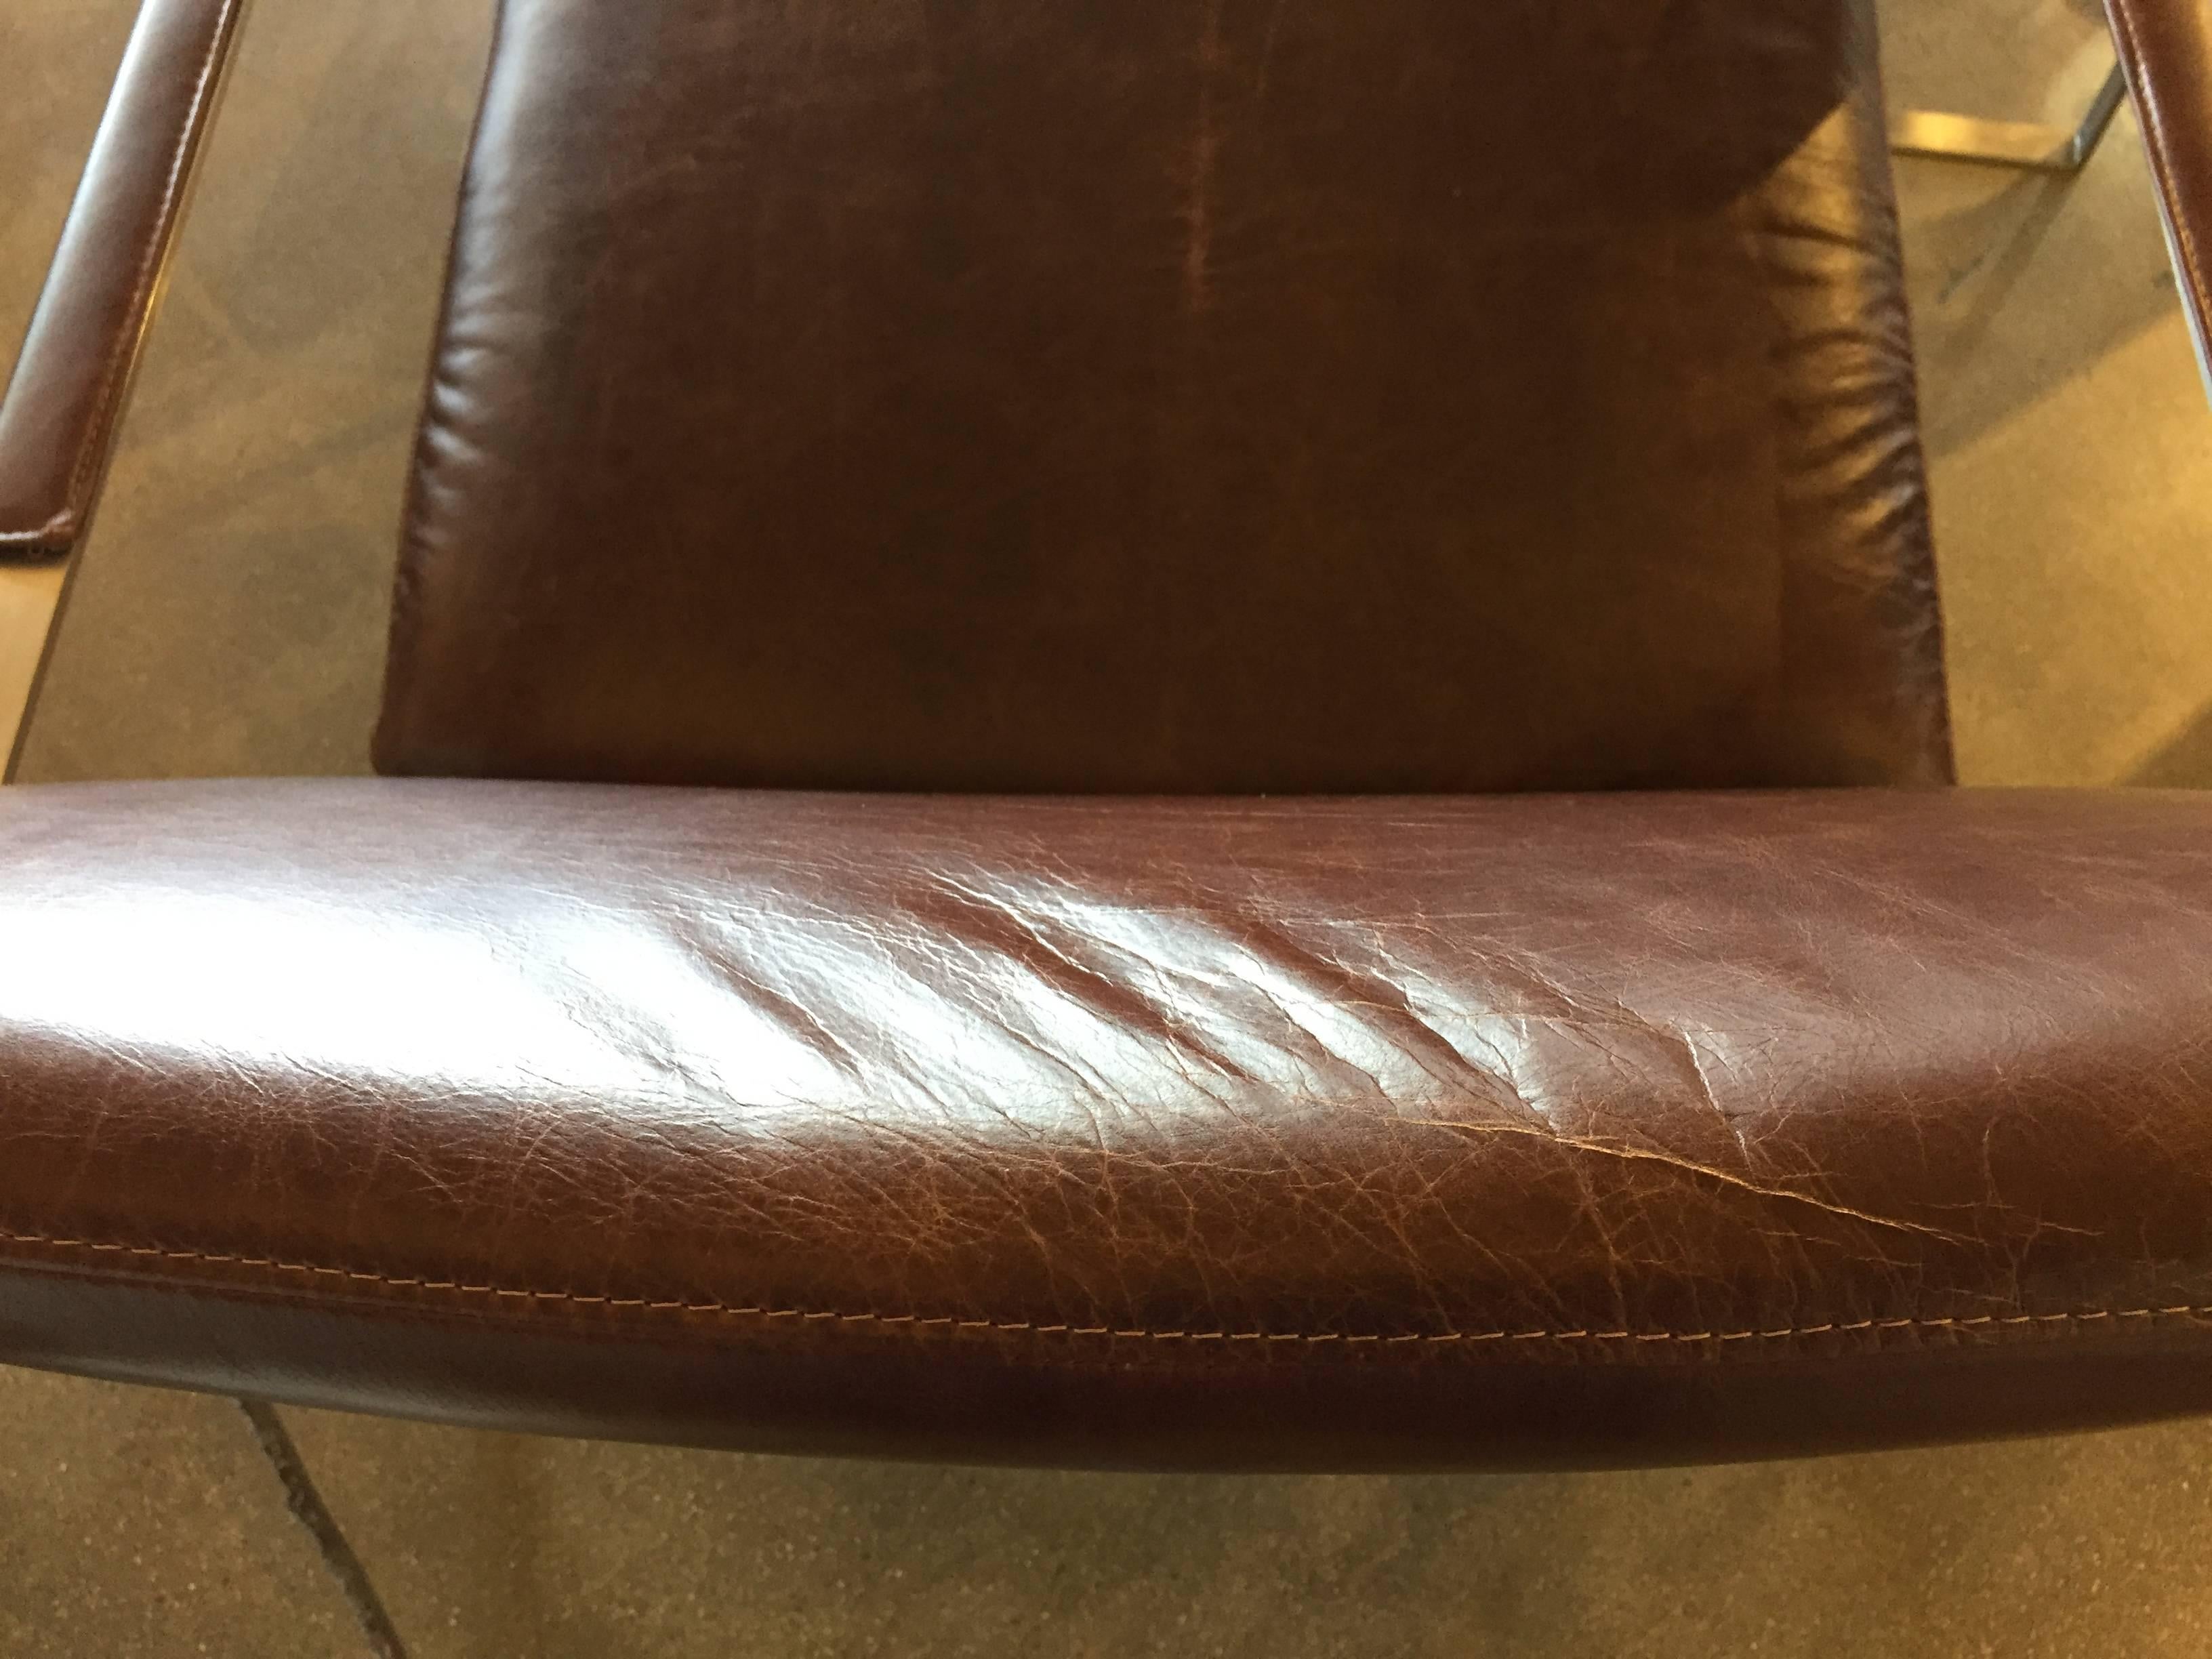 A quite lovely pair of brushed steel and ditstressed leather armchairs with overstitching detail. We have had these completely redone in a distressed brown leather, to give them a warm look. The frames are brushed steel and have allen head screws